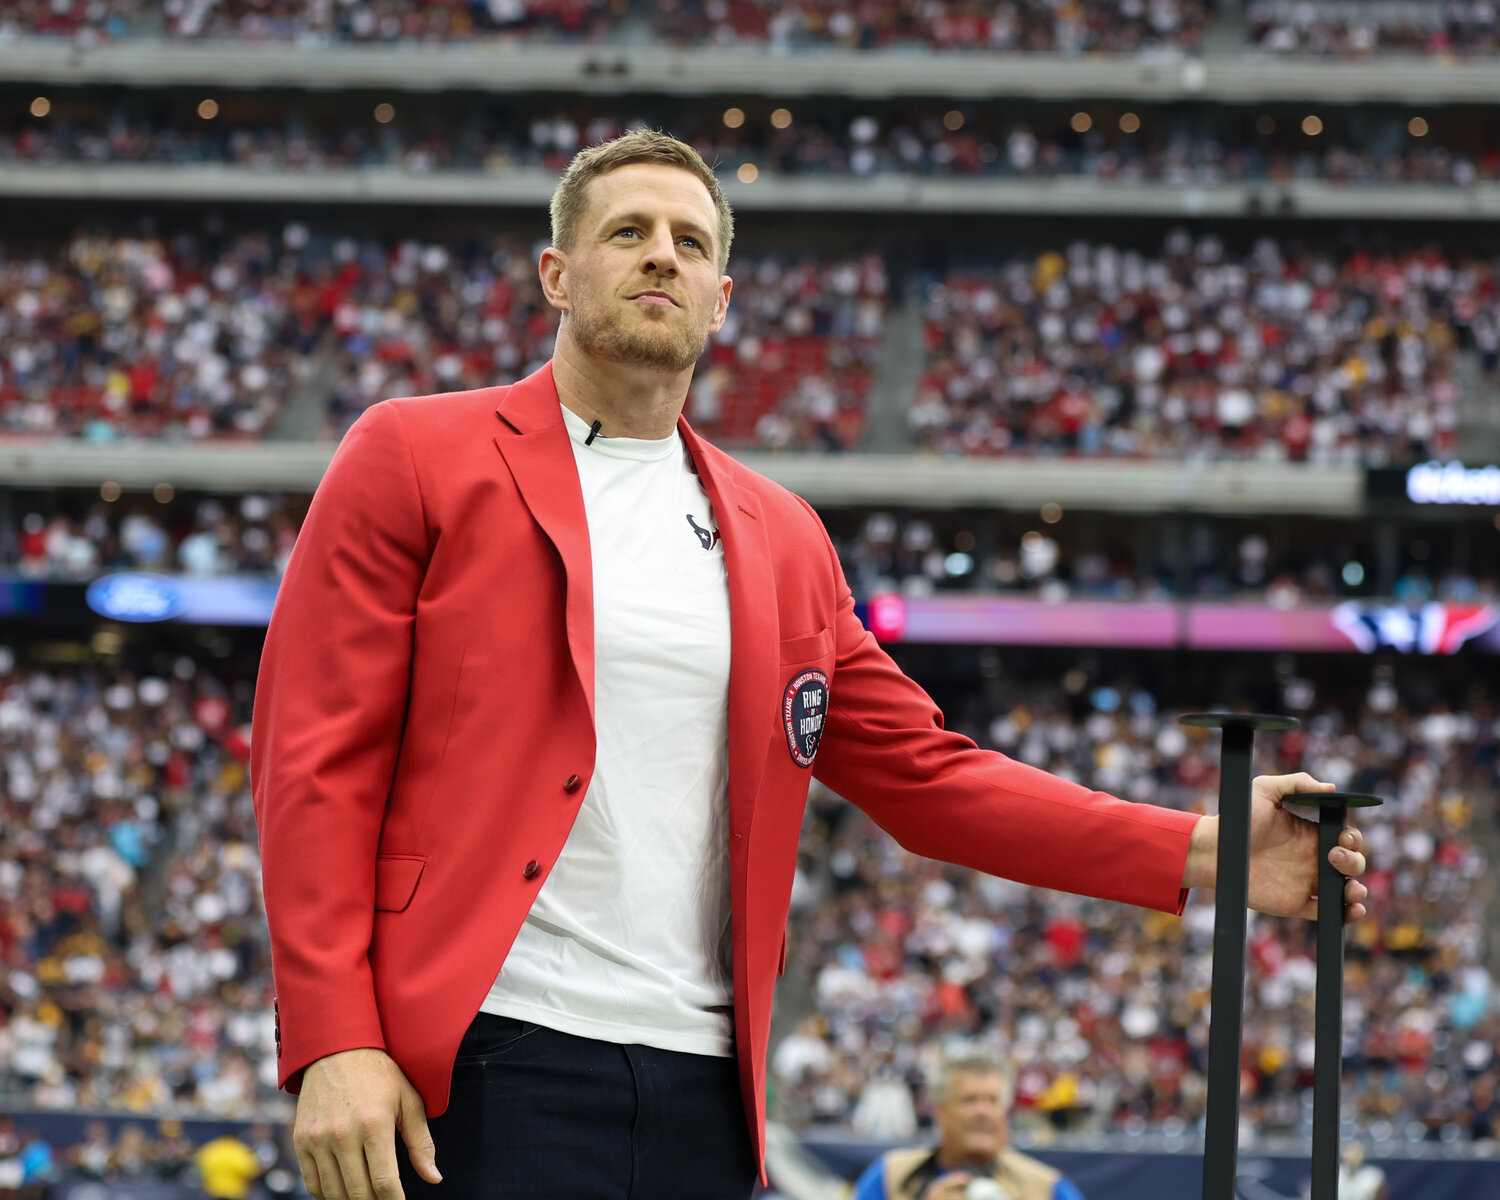 Former Houston Texans player JJ Watt is inducted into the Texans’ Ring of Honor at halftime during an NFL game between the Texans and the Steelers on October 1, 2023 in Houston.